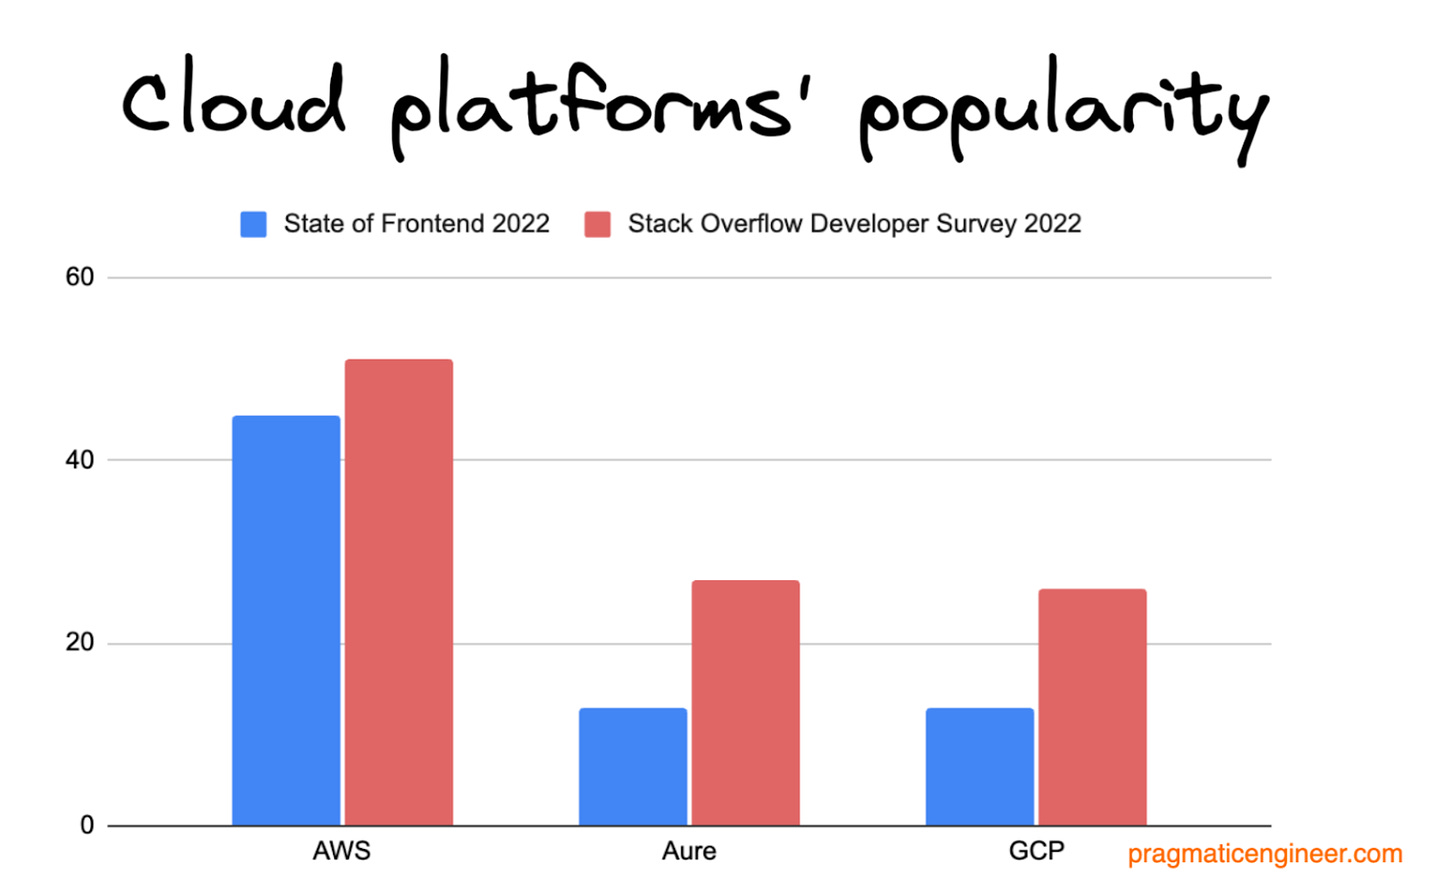 Cloud Platforms used to deploy code based on State of Frontend 2022 and Stack Overflow Developer Survey 2022.